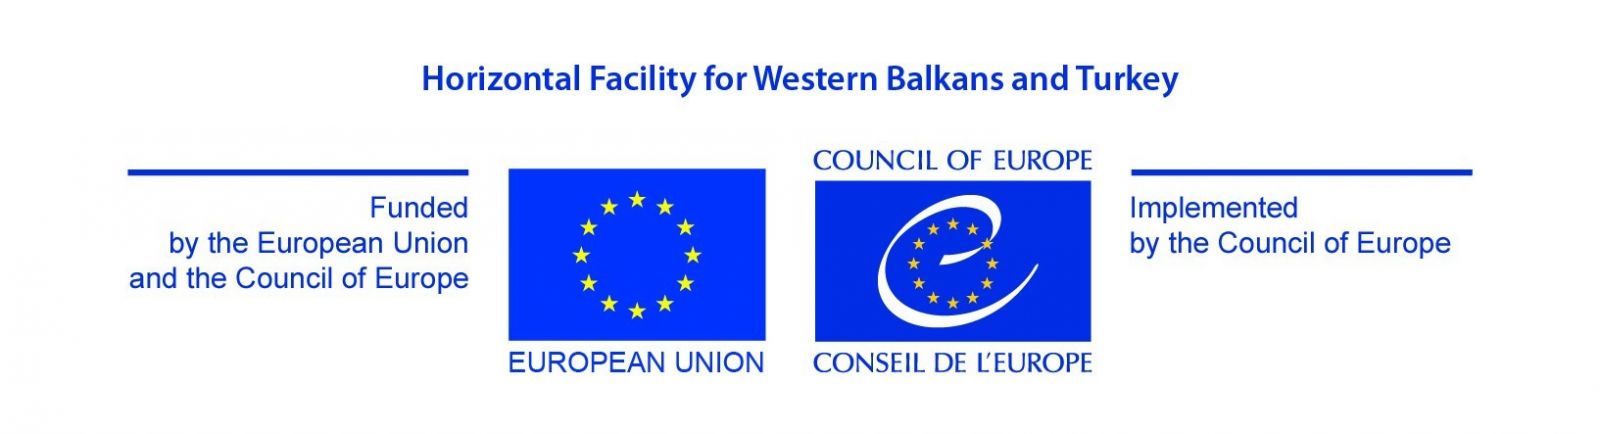 Three years of support for compliance with European standards in Serbia